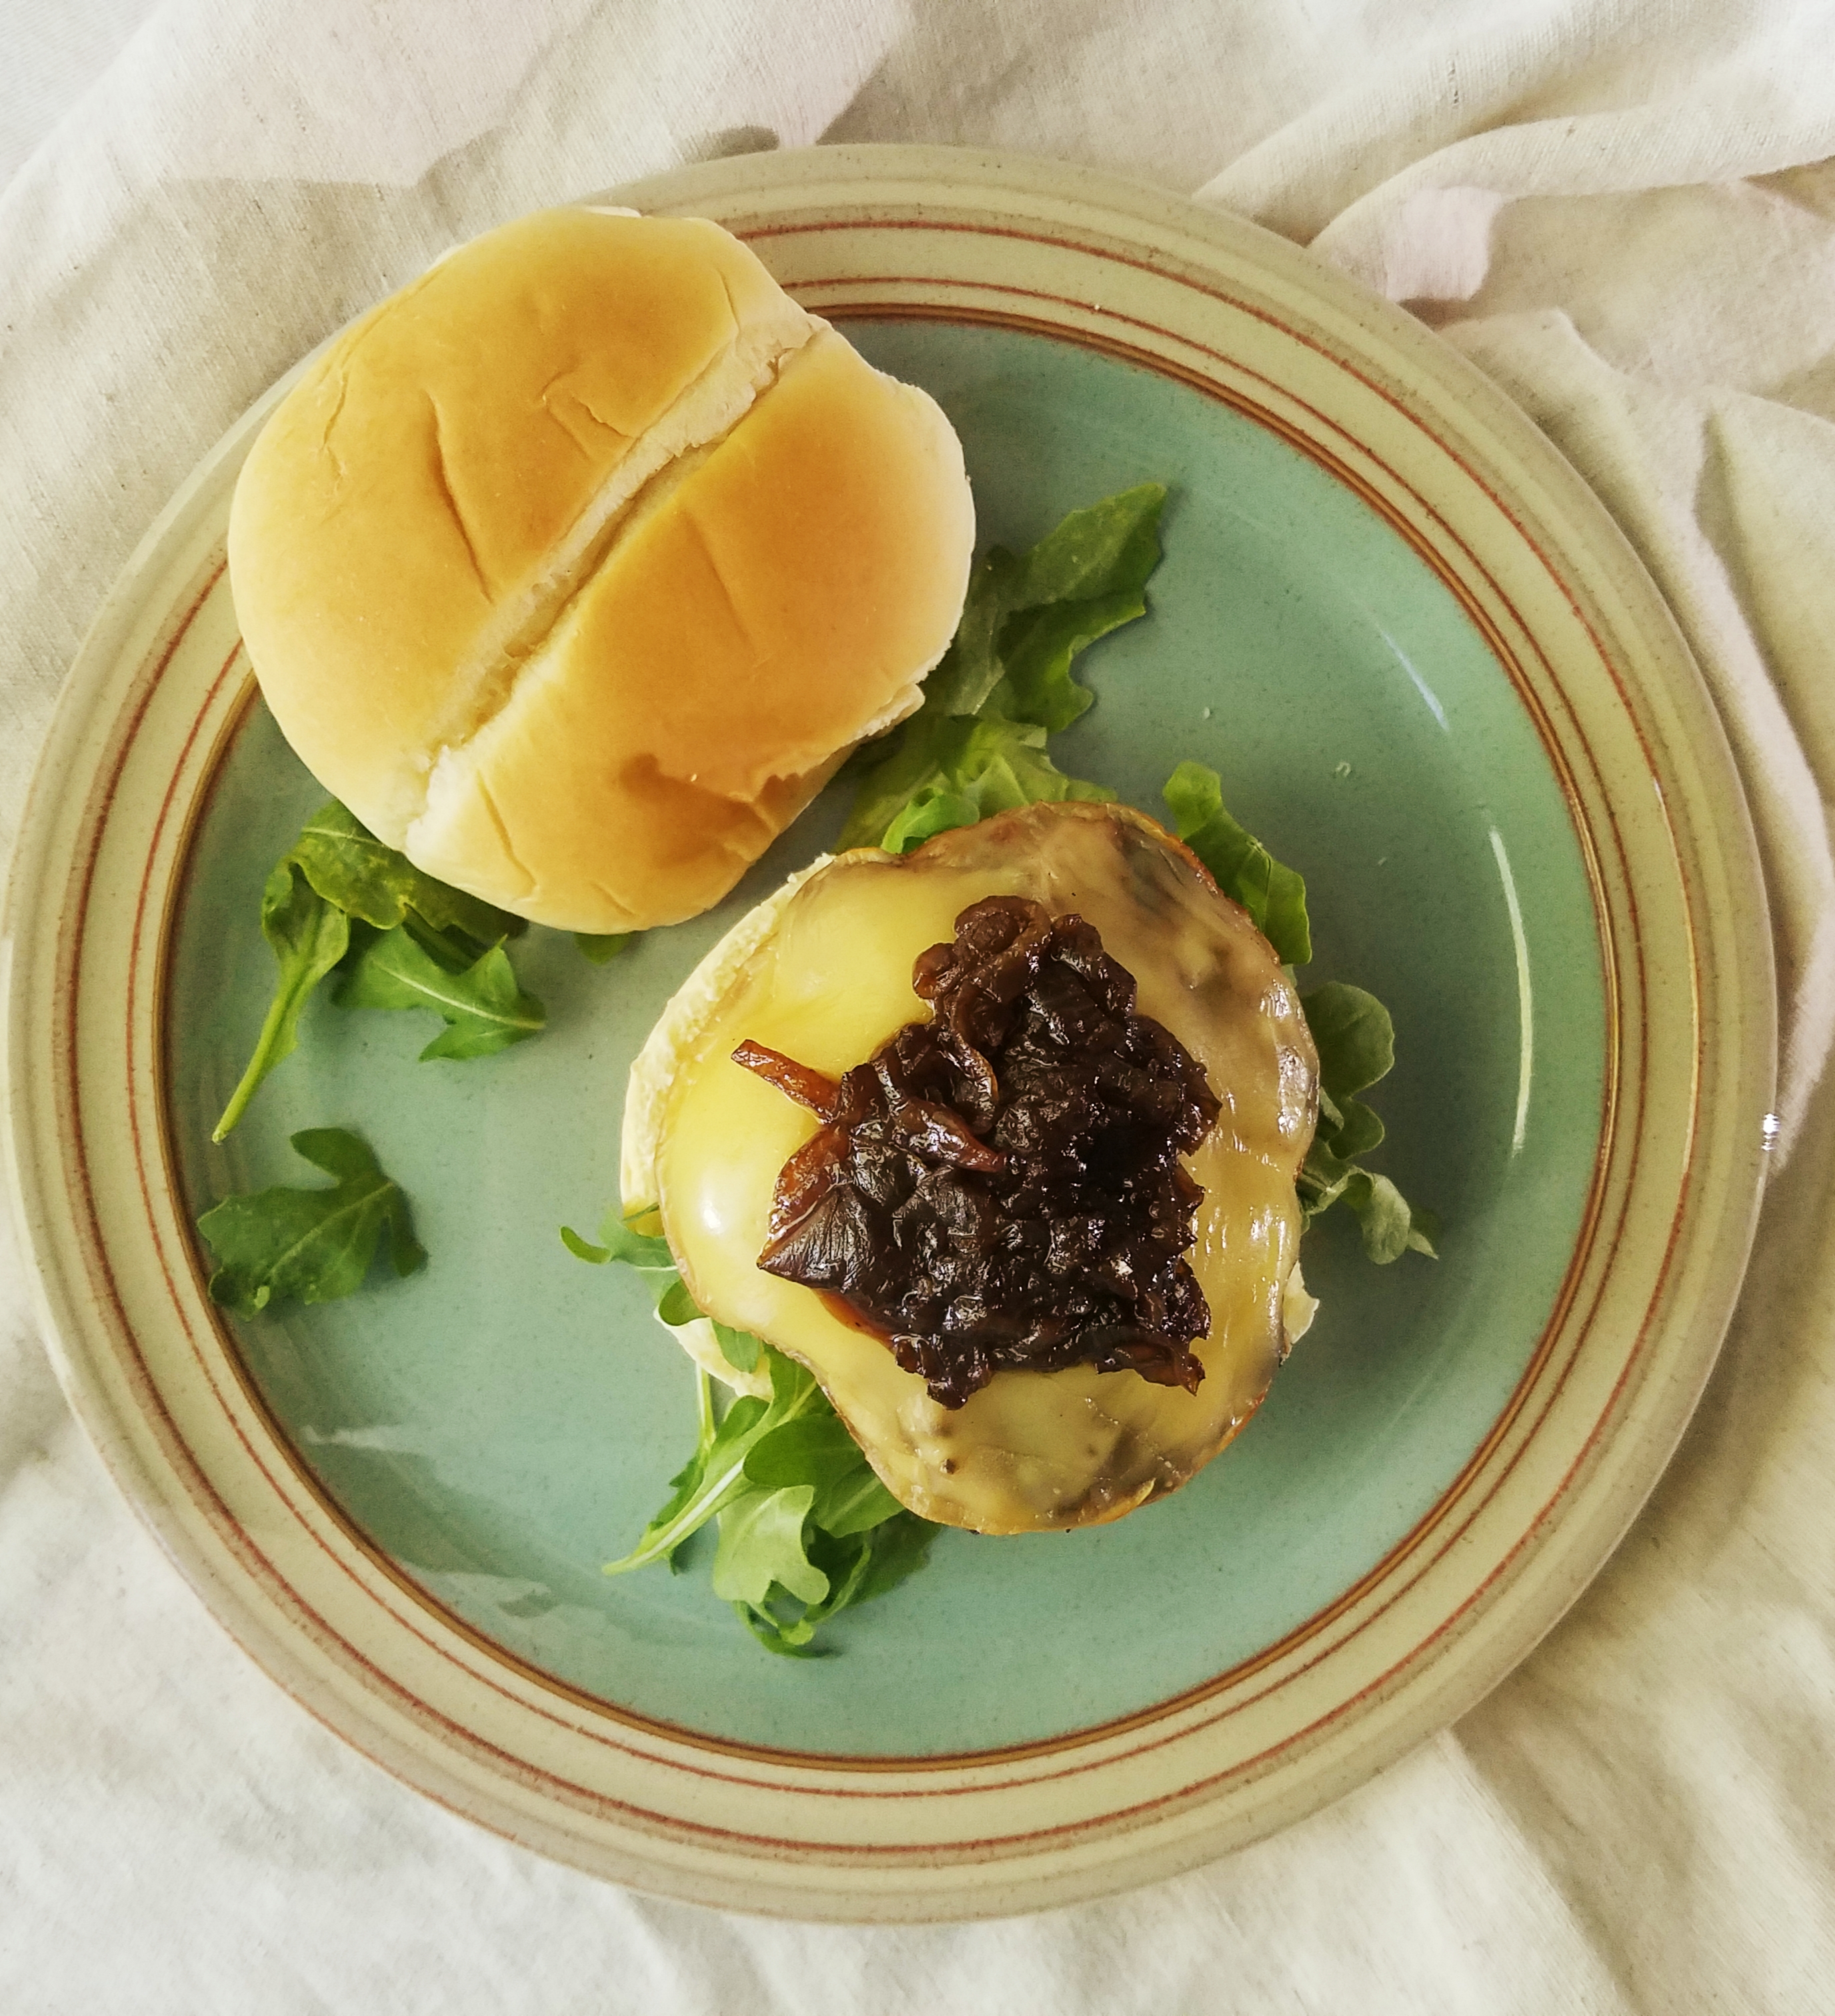 Smoked Gouda Burgers with Onion Jam (Recipe Inspired by DESPERATE GIRLS)